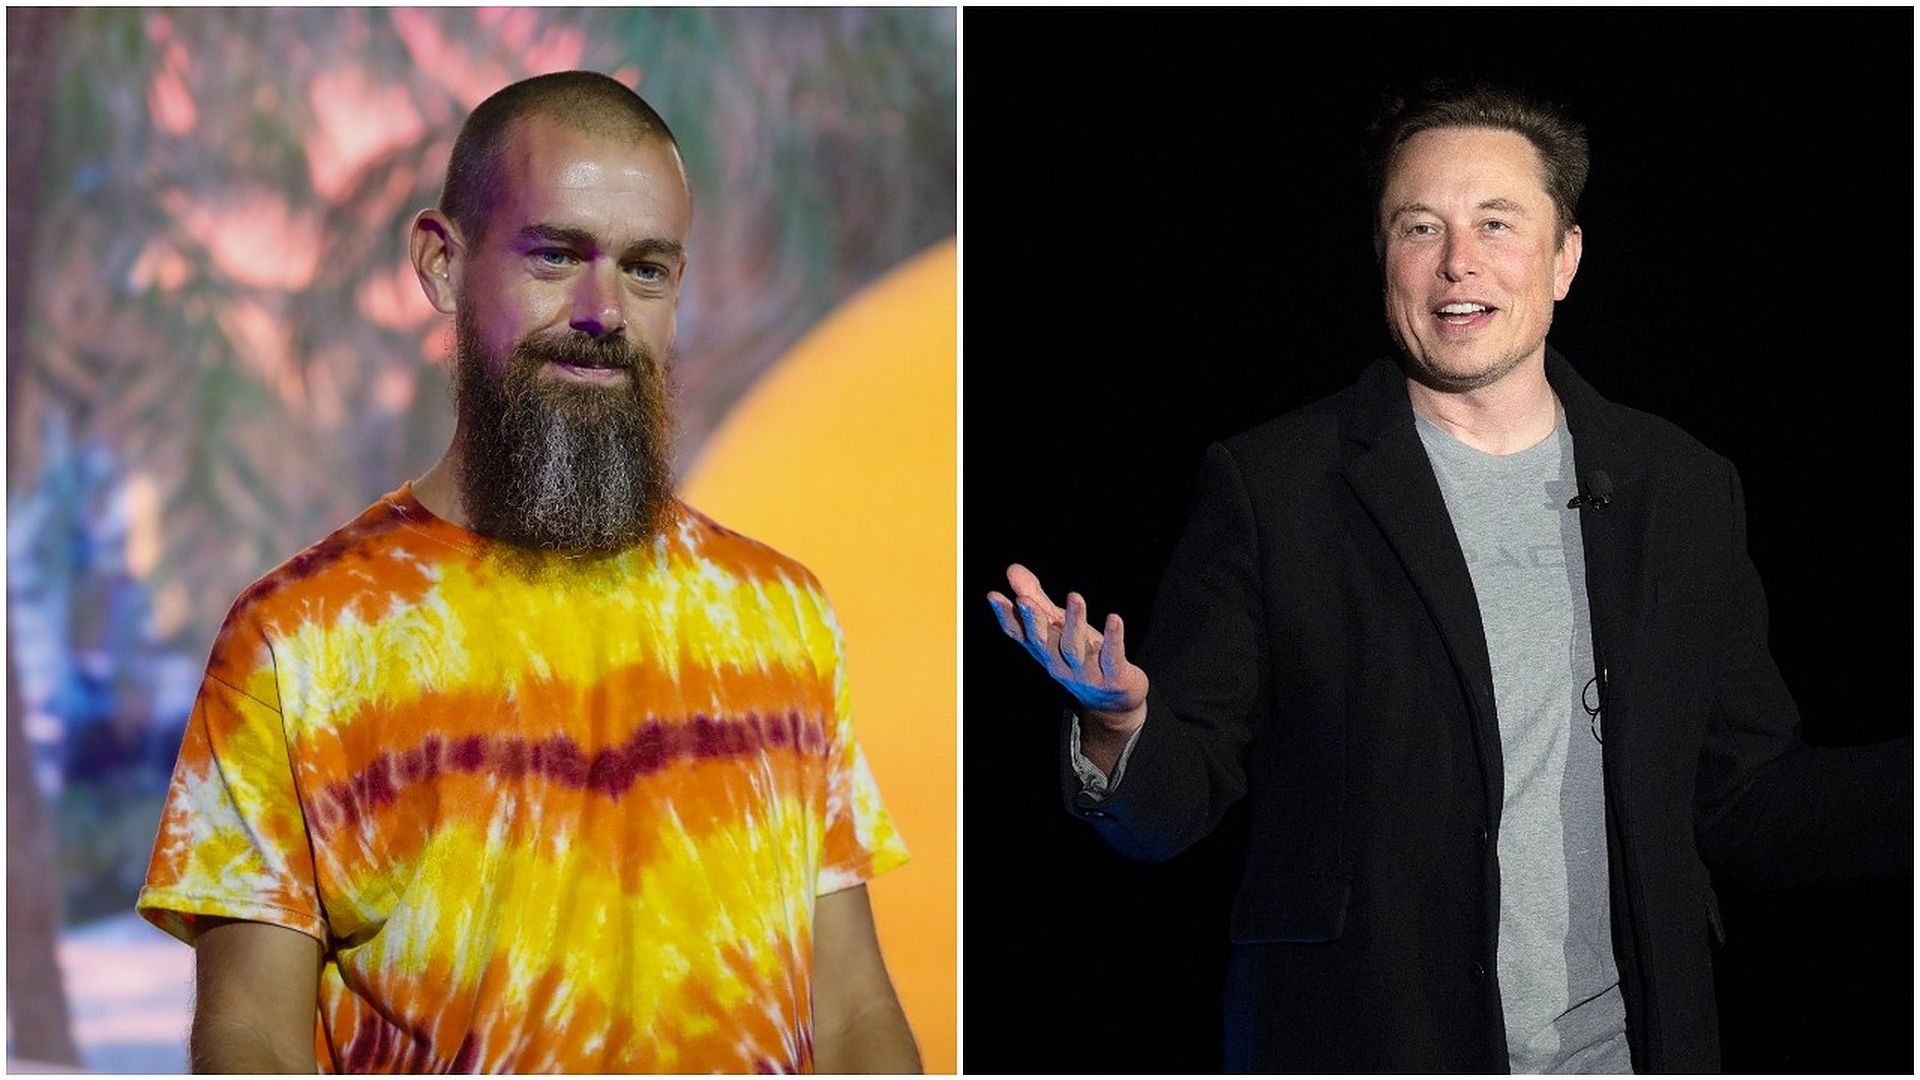 Combination images of Jack Dorsey and Elon Musk